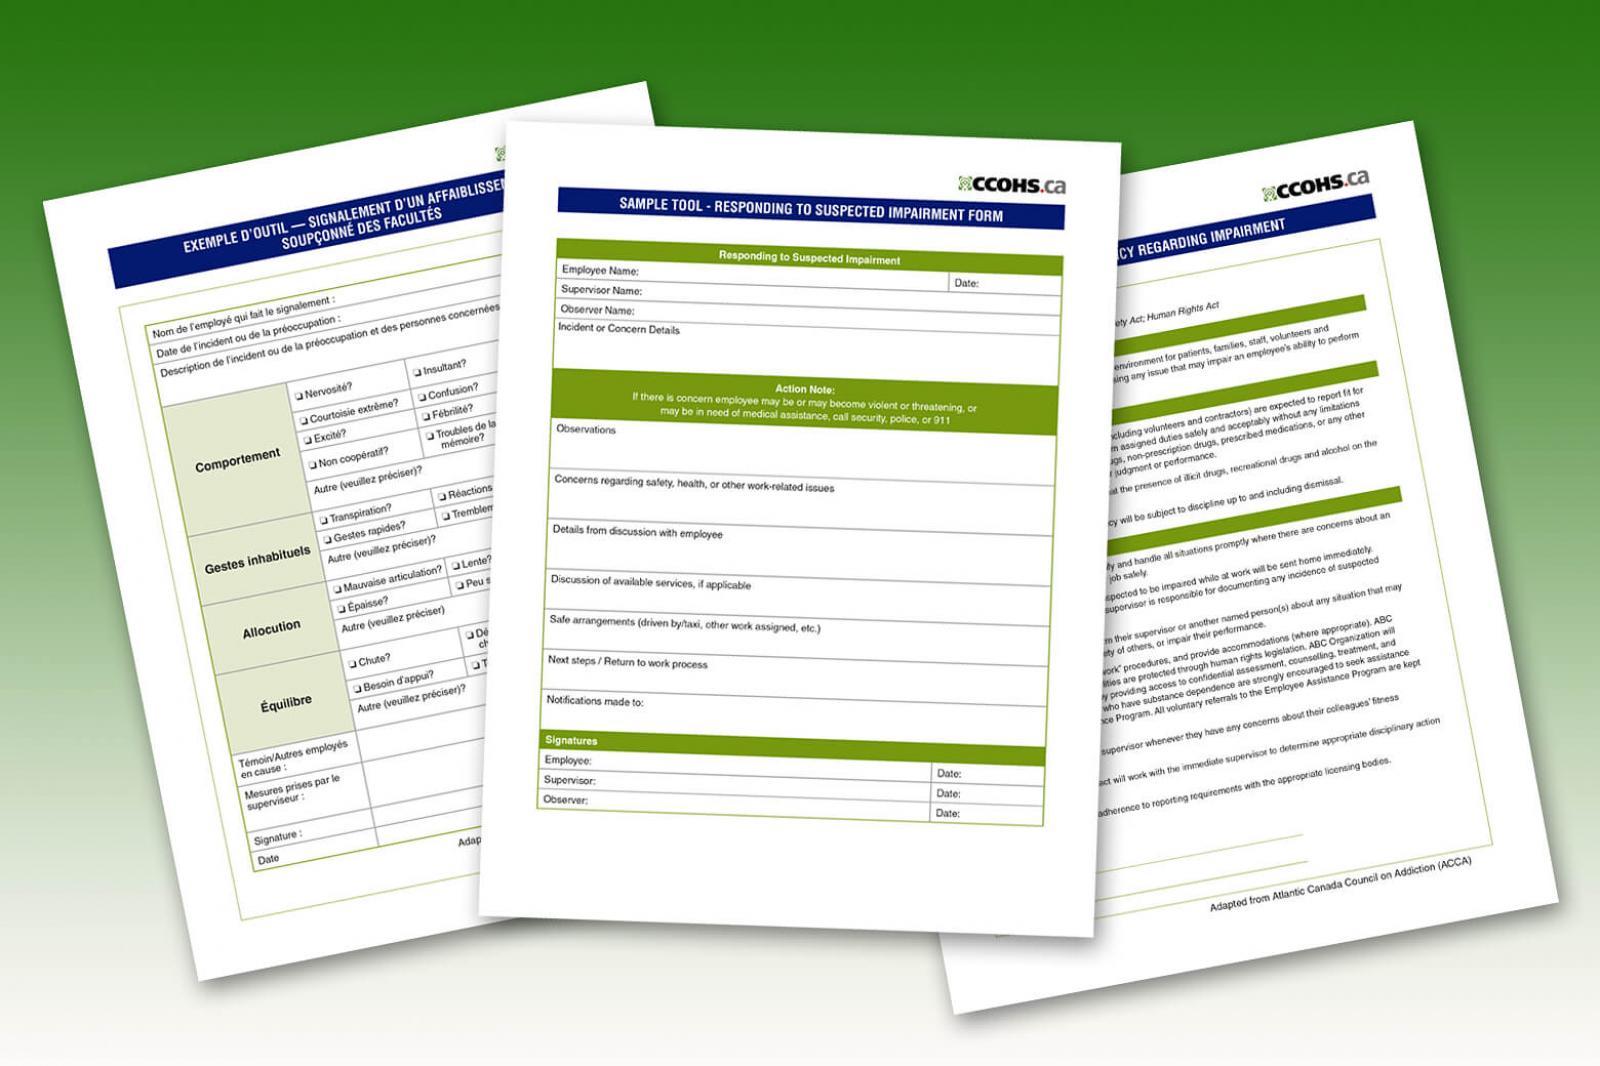 Impairment policy and reporting templates from CCOHS